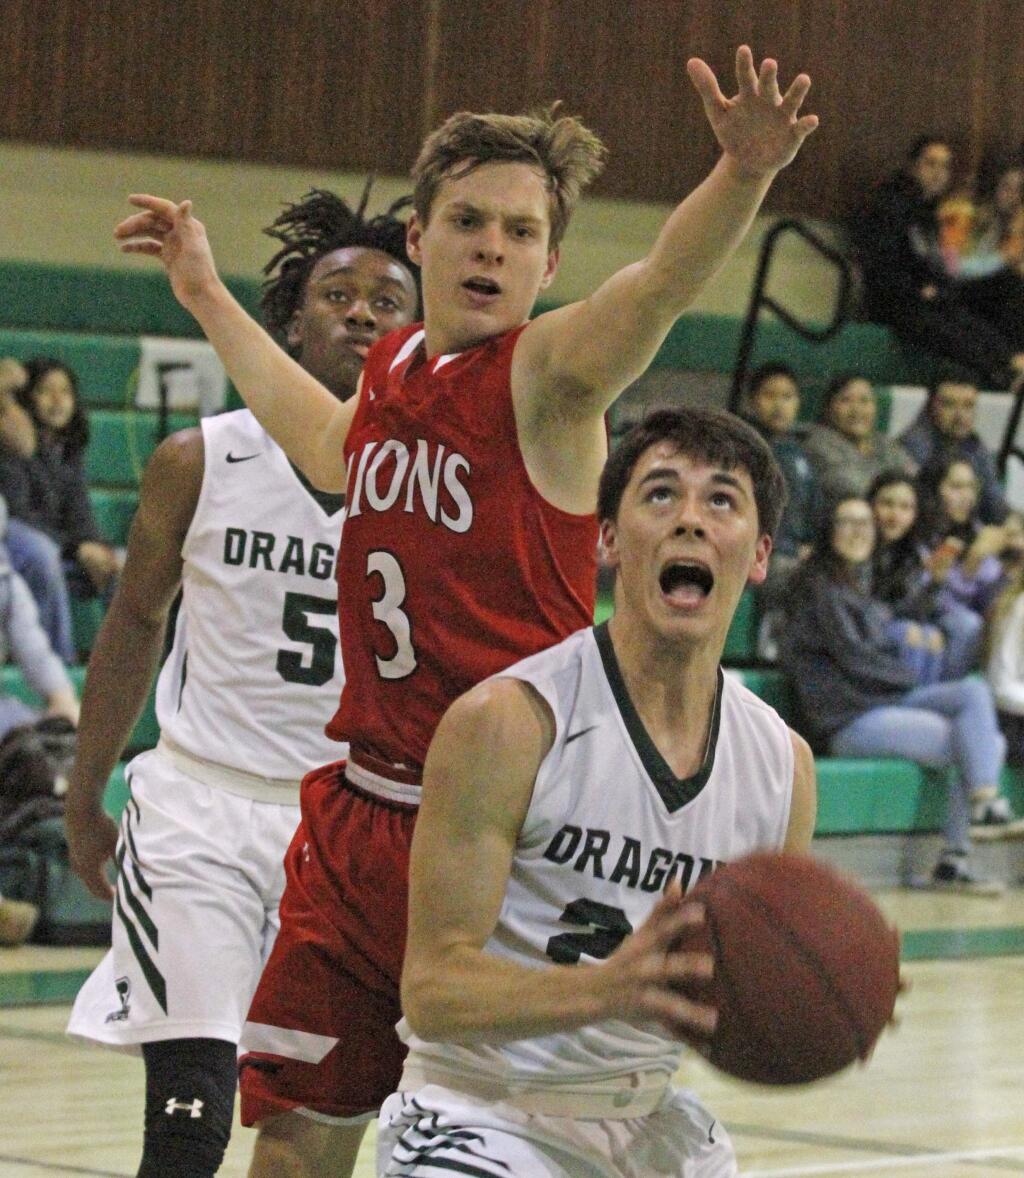 Bill Hoban/Index-TribuneWith Jay Taylor (5) trailing, Sonoma's Dylan Samaniego looks to put a shot over an El Molino defender during Tuesday night's game. The Dragons walked away with a 62-32 throttling of the Lions.